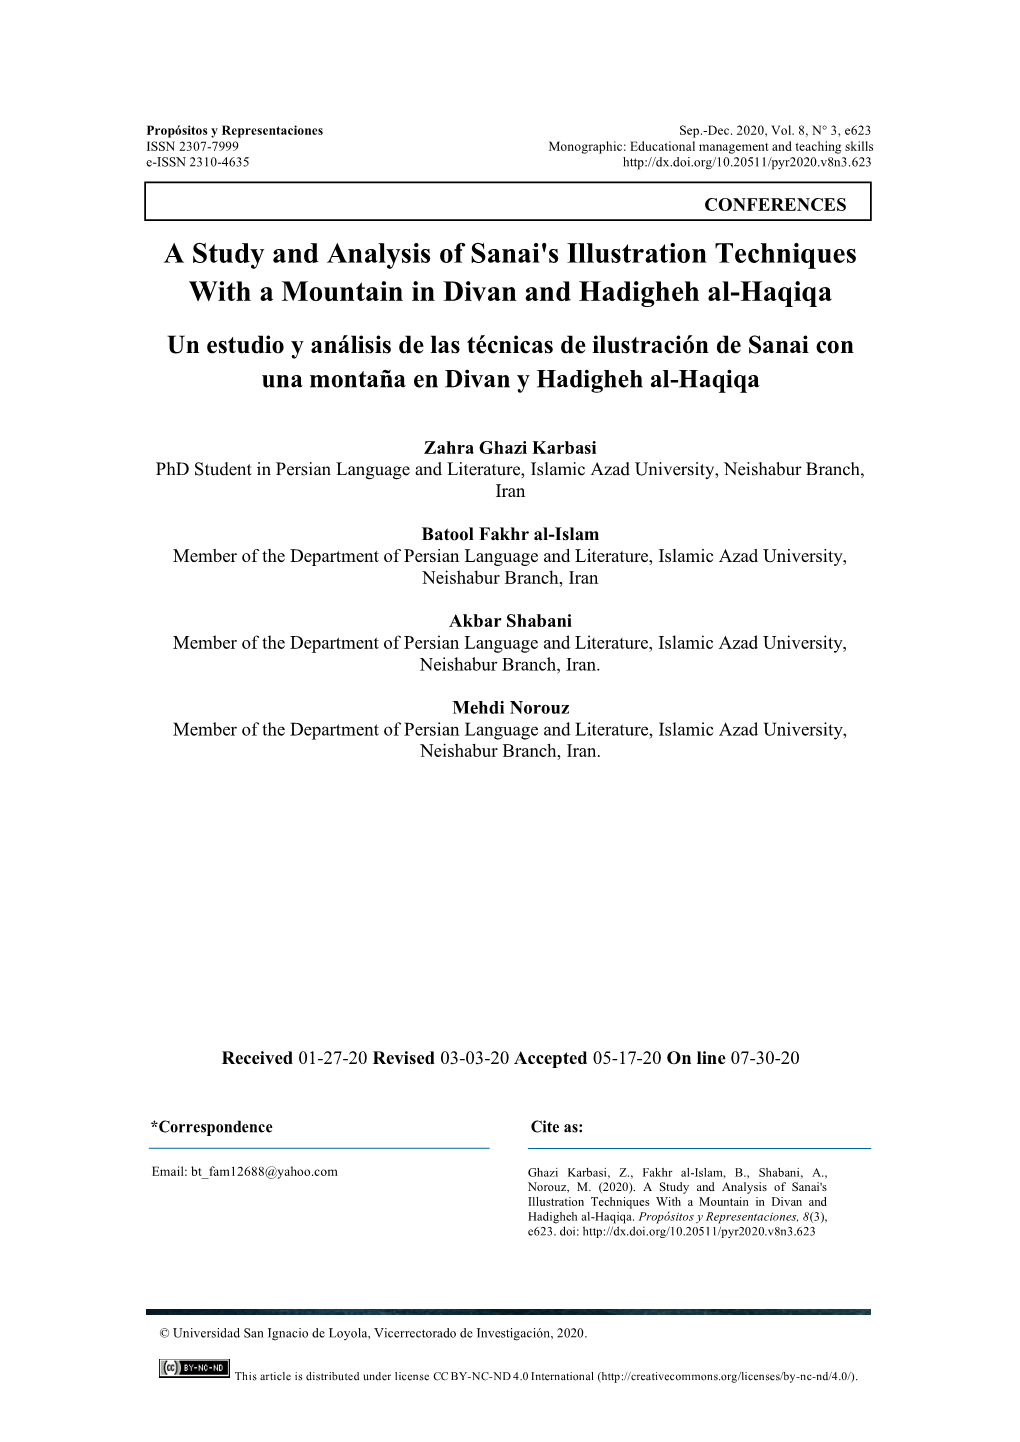 A Study and Analysis of Sanai's Illustration Techniques with A